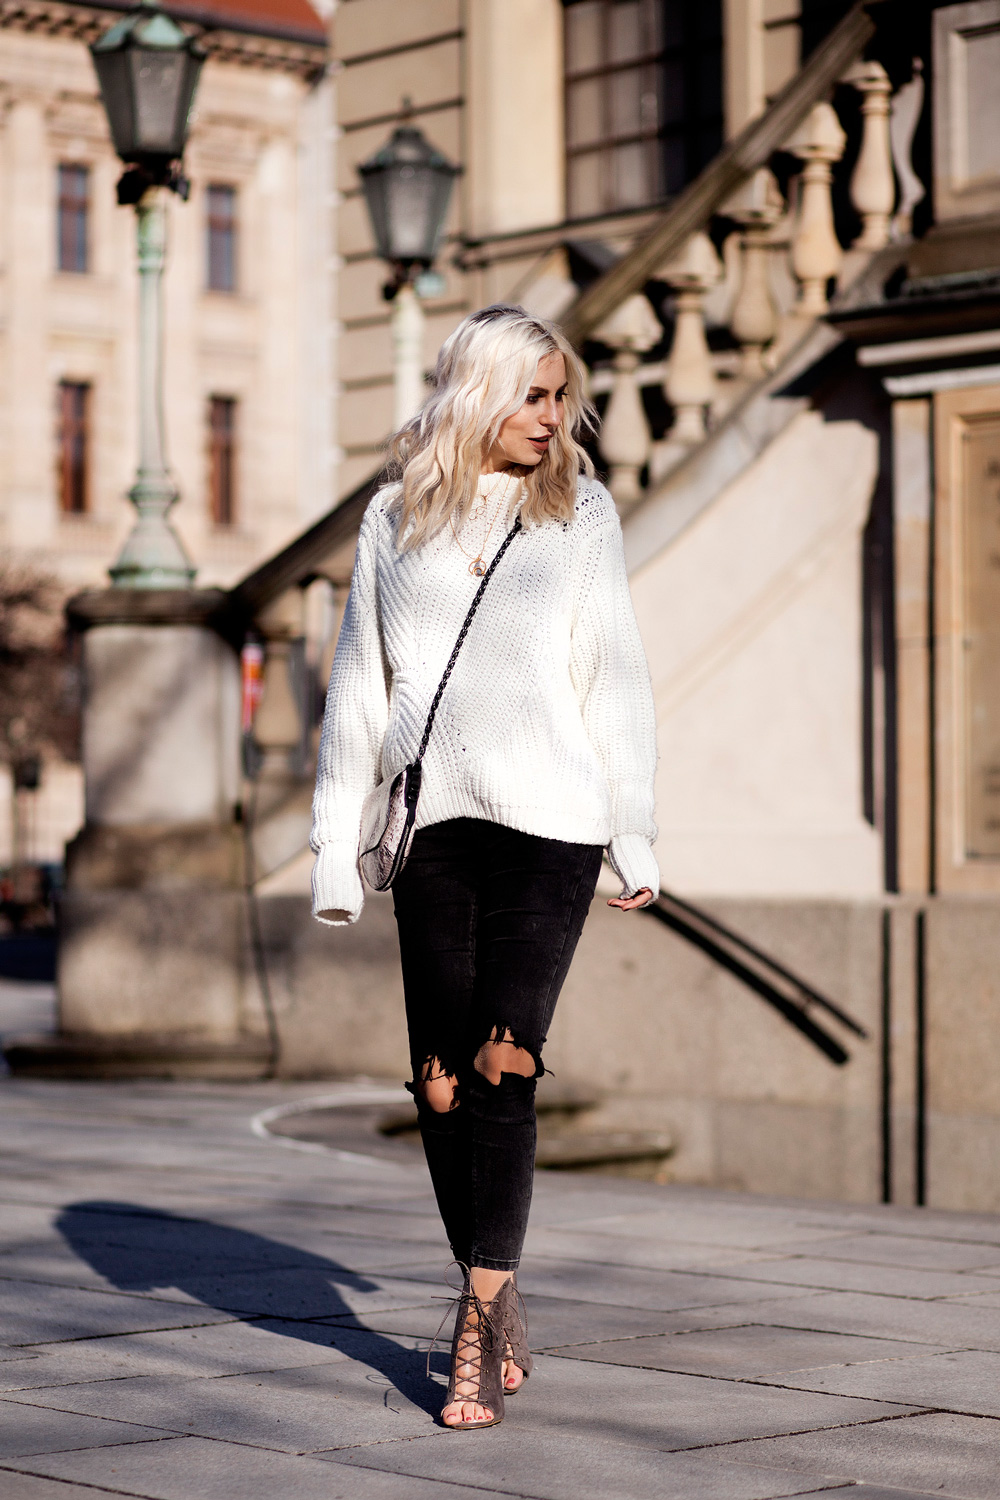 view the full outfit on my blog | lace up boots from Missguided | black jeans | white sweater (knitwear) | snake bag from rag & bone | winter style taken in Berlin